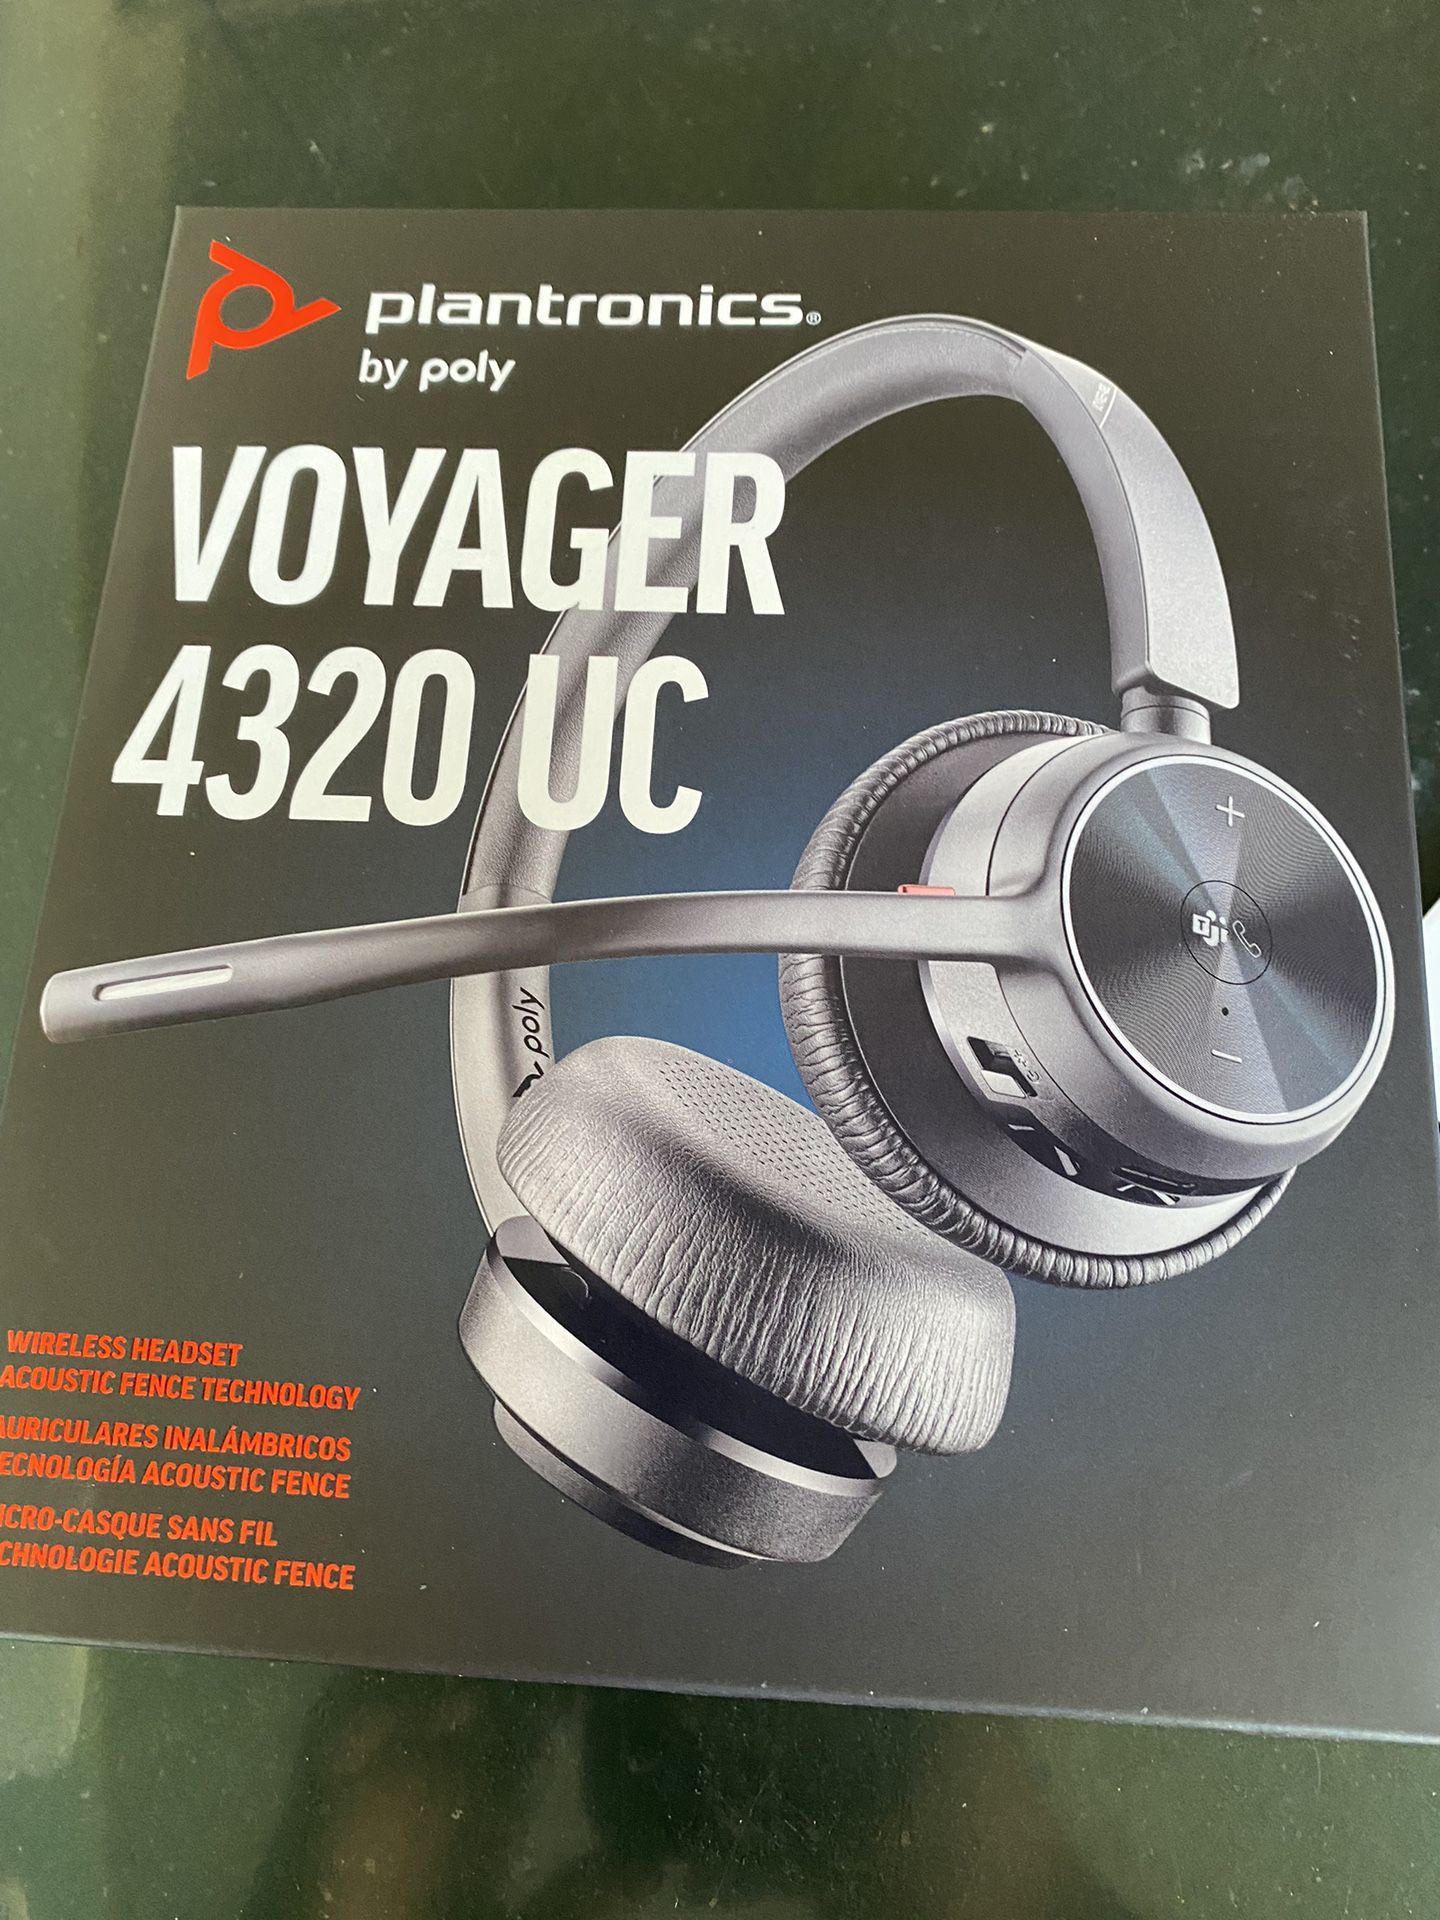 Plantronics By Poly - Voyager 4320 Uc Wireless Headsets 